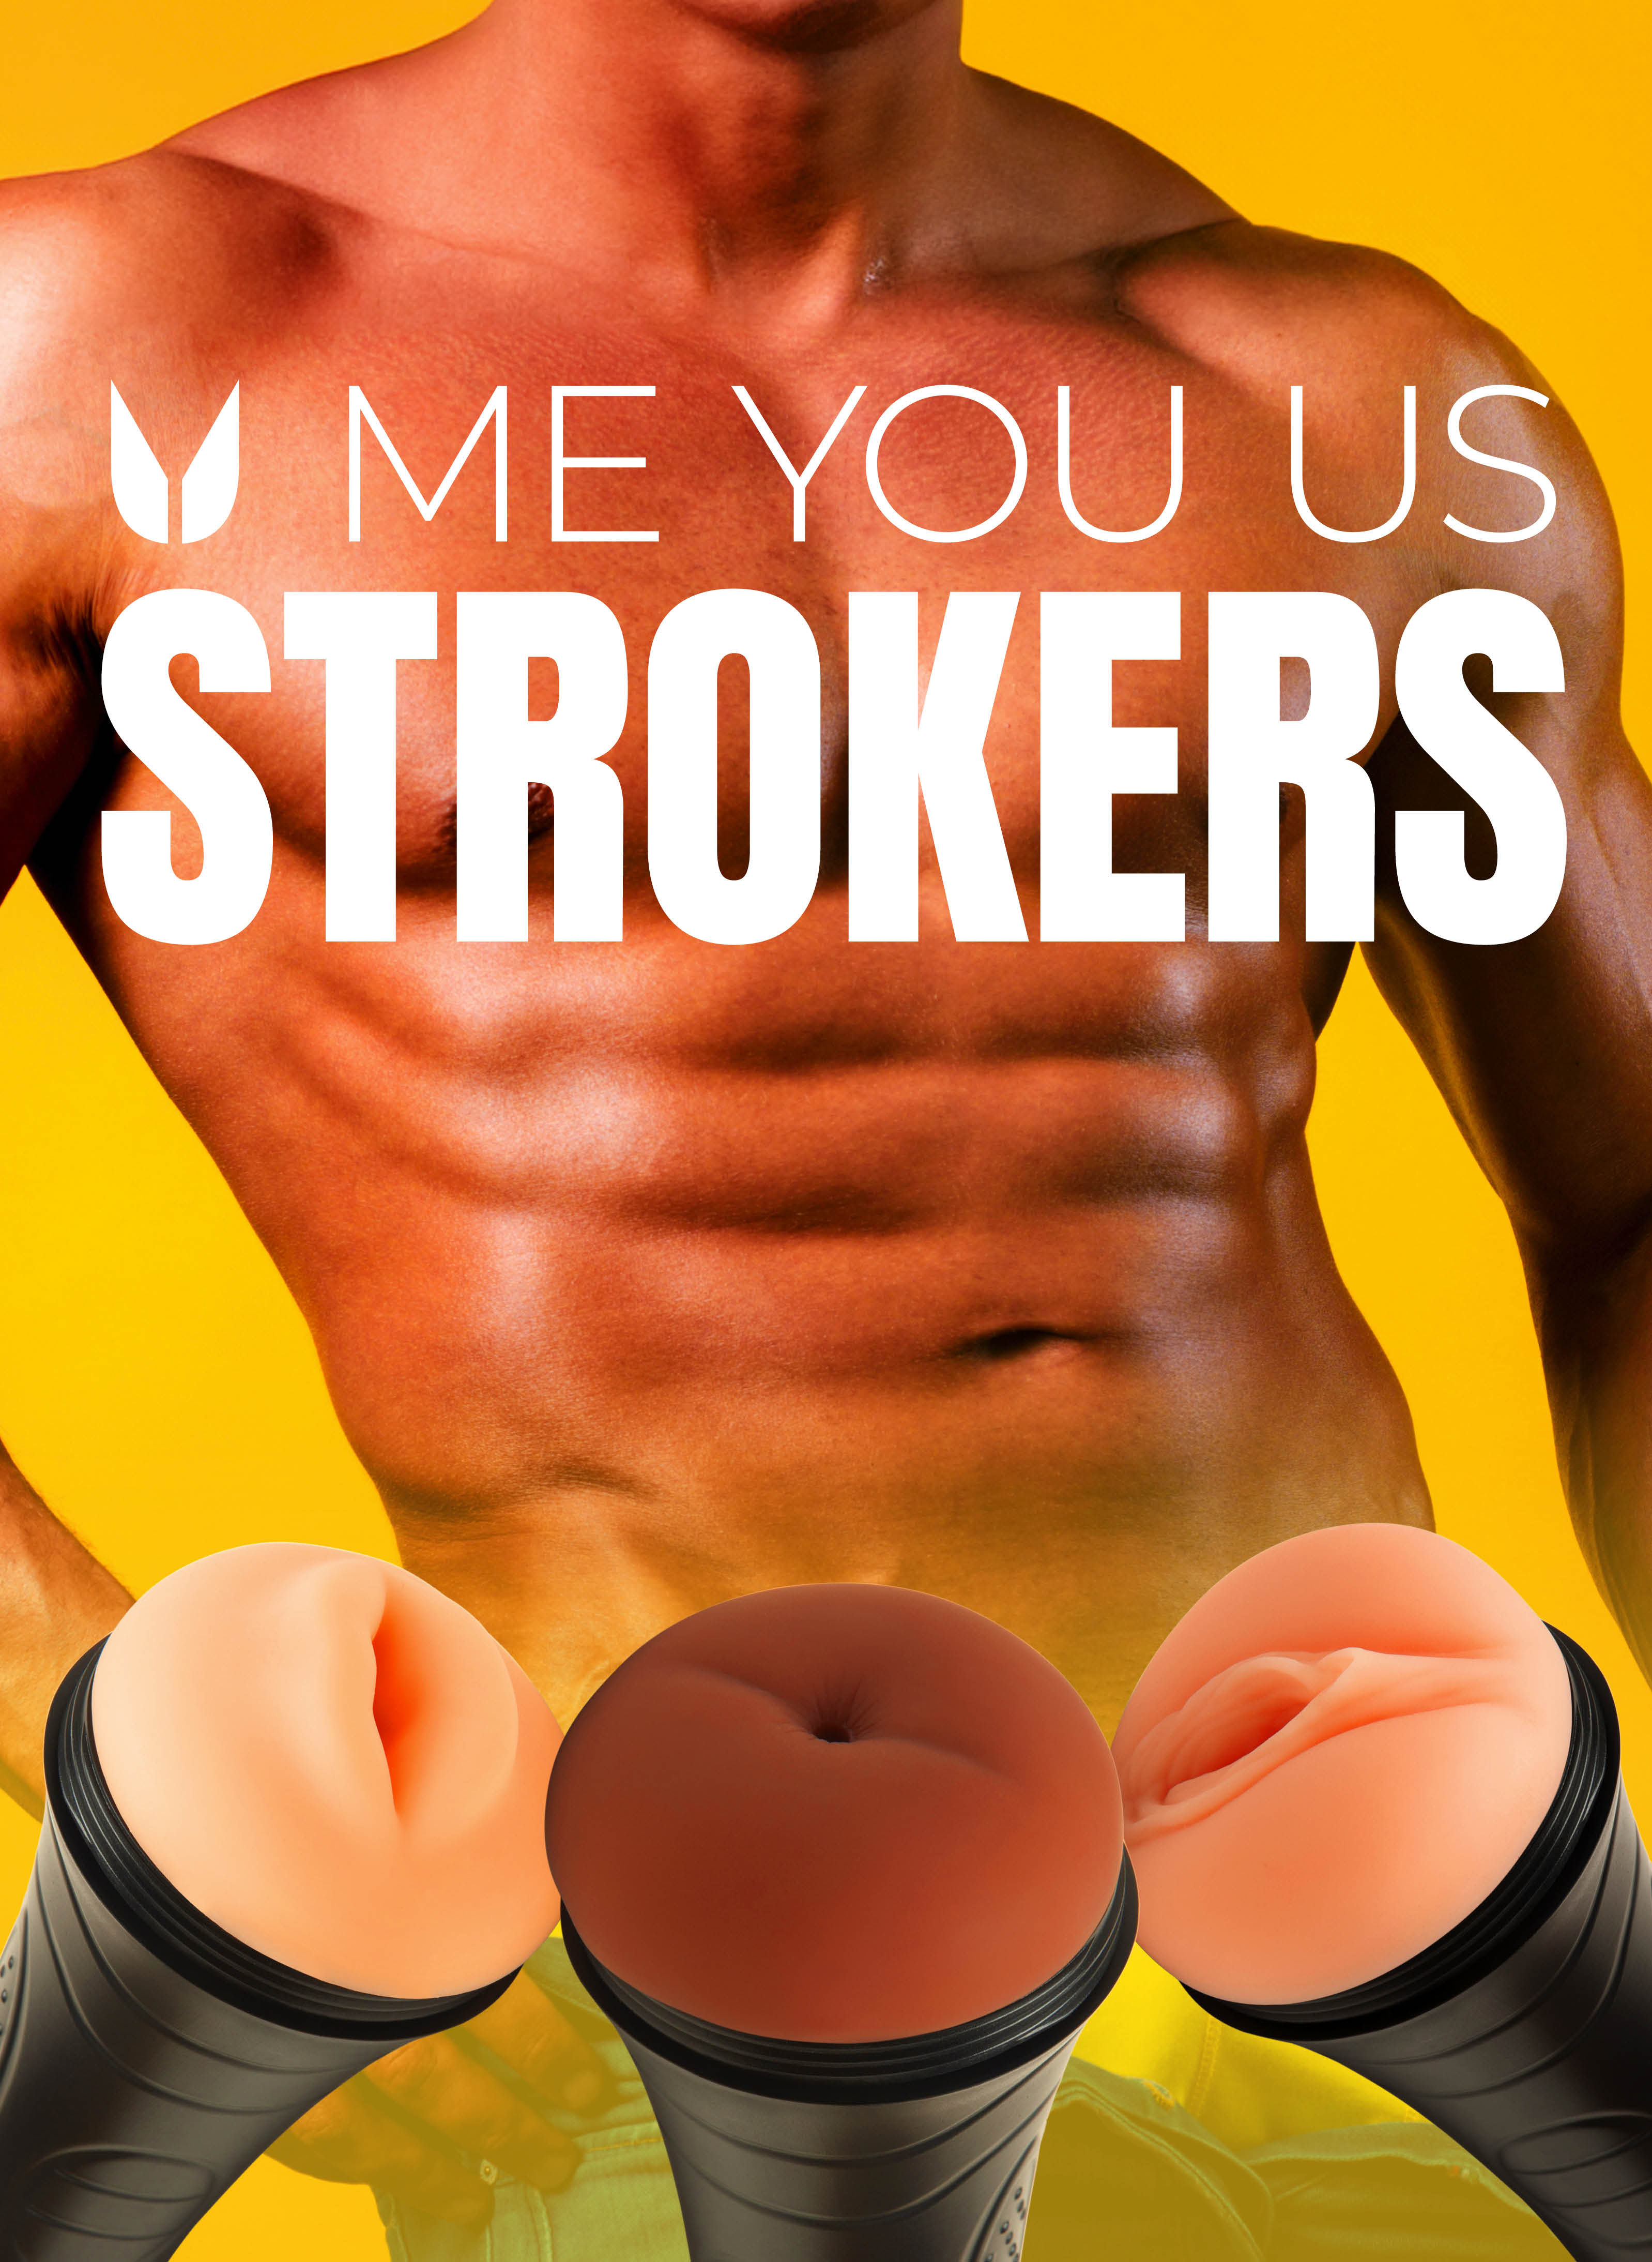 Simply Pleasure Promotional Image - Me You Us Strokers - Masturbation May - 10% Off - Mobile